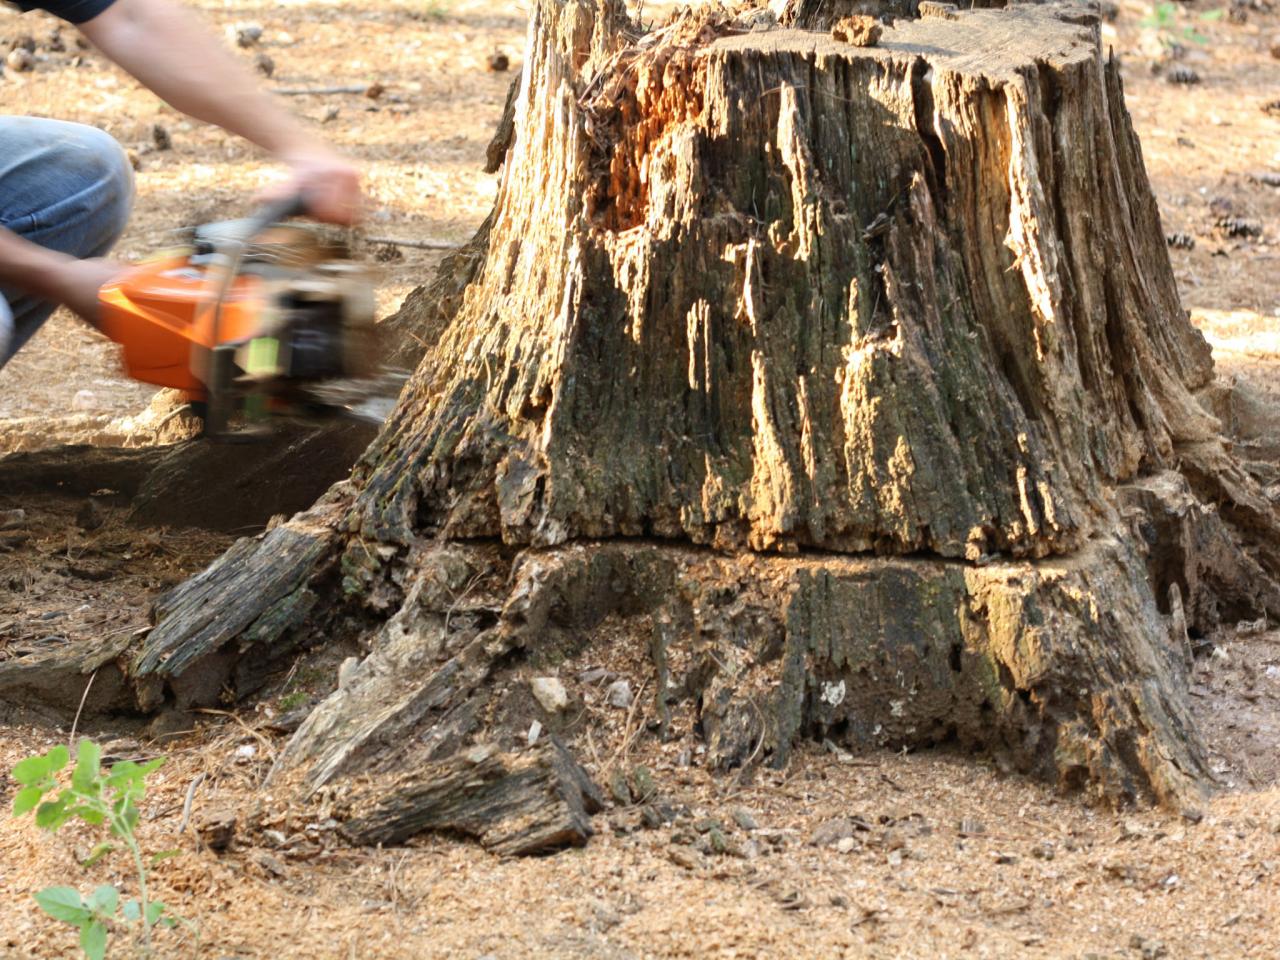 How do you make a tree stump rot faster?